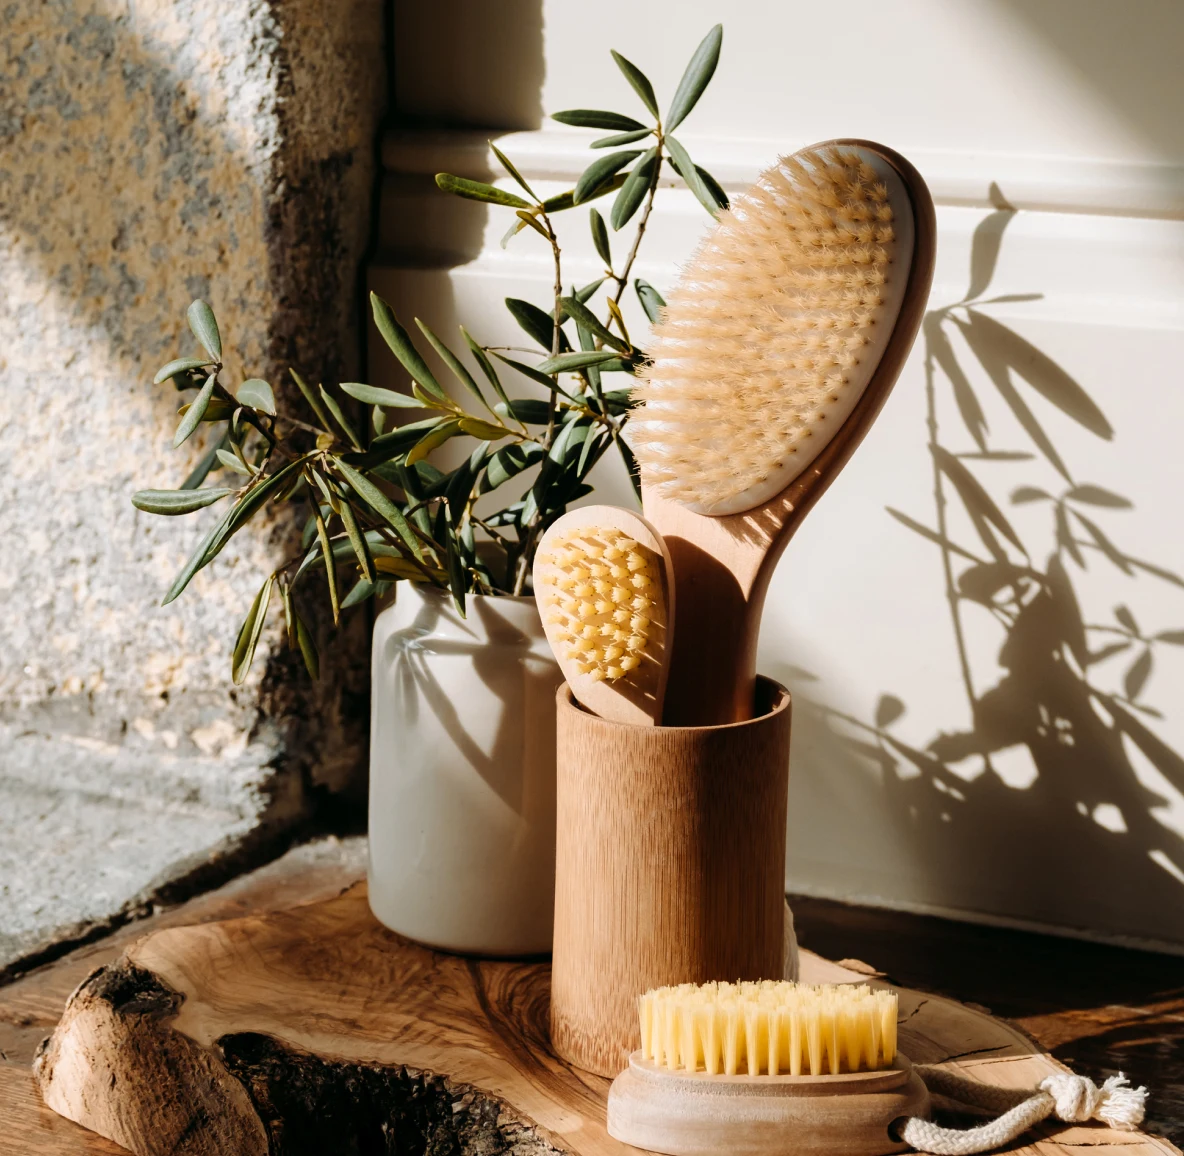 Wooden hair brushes in a wooden container next to a green plant